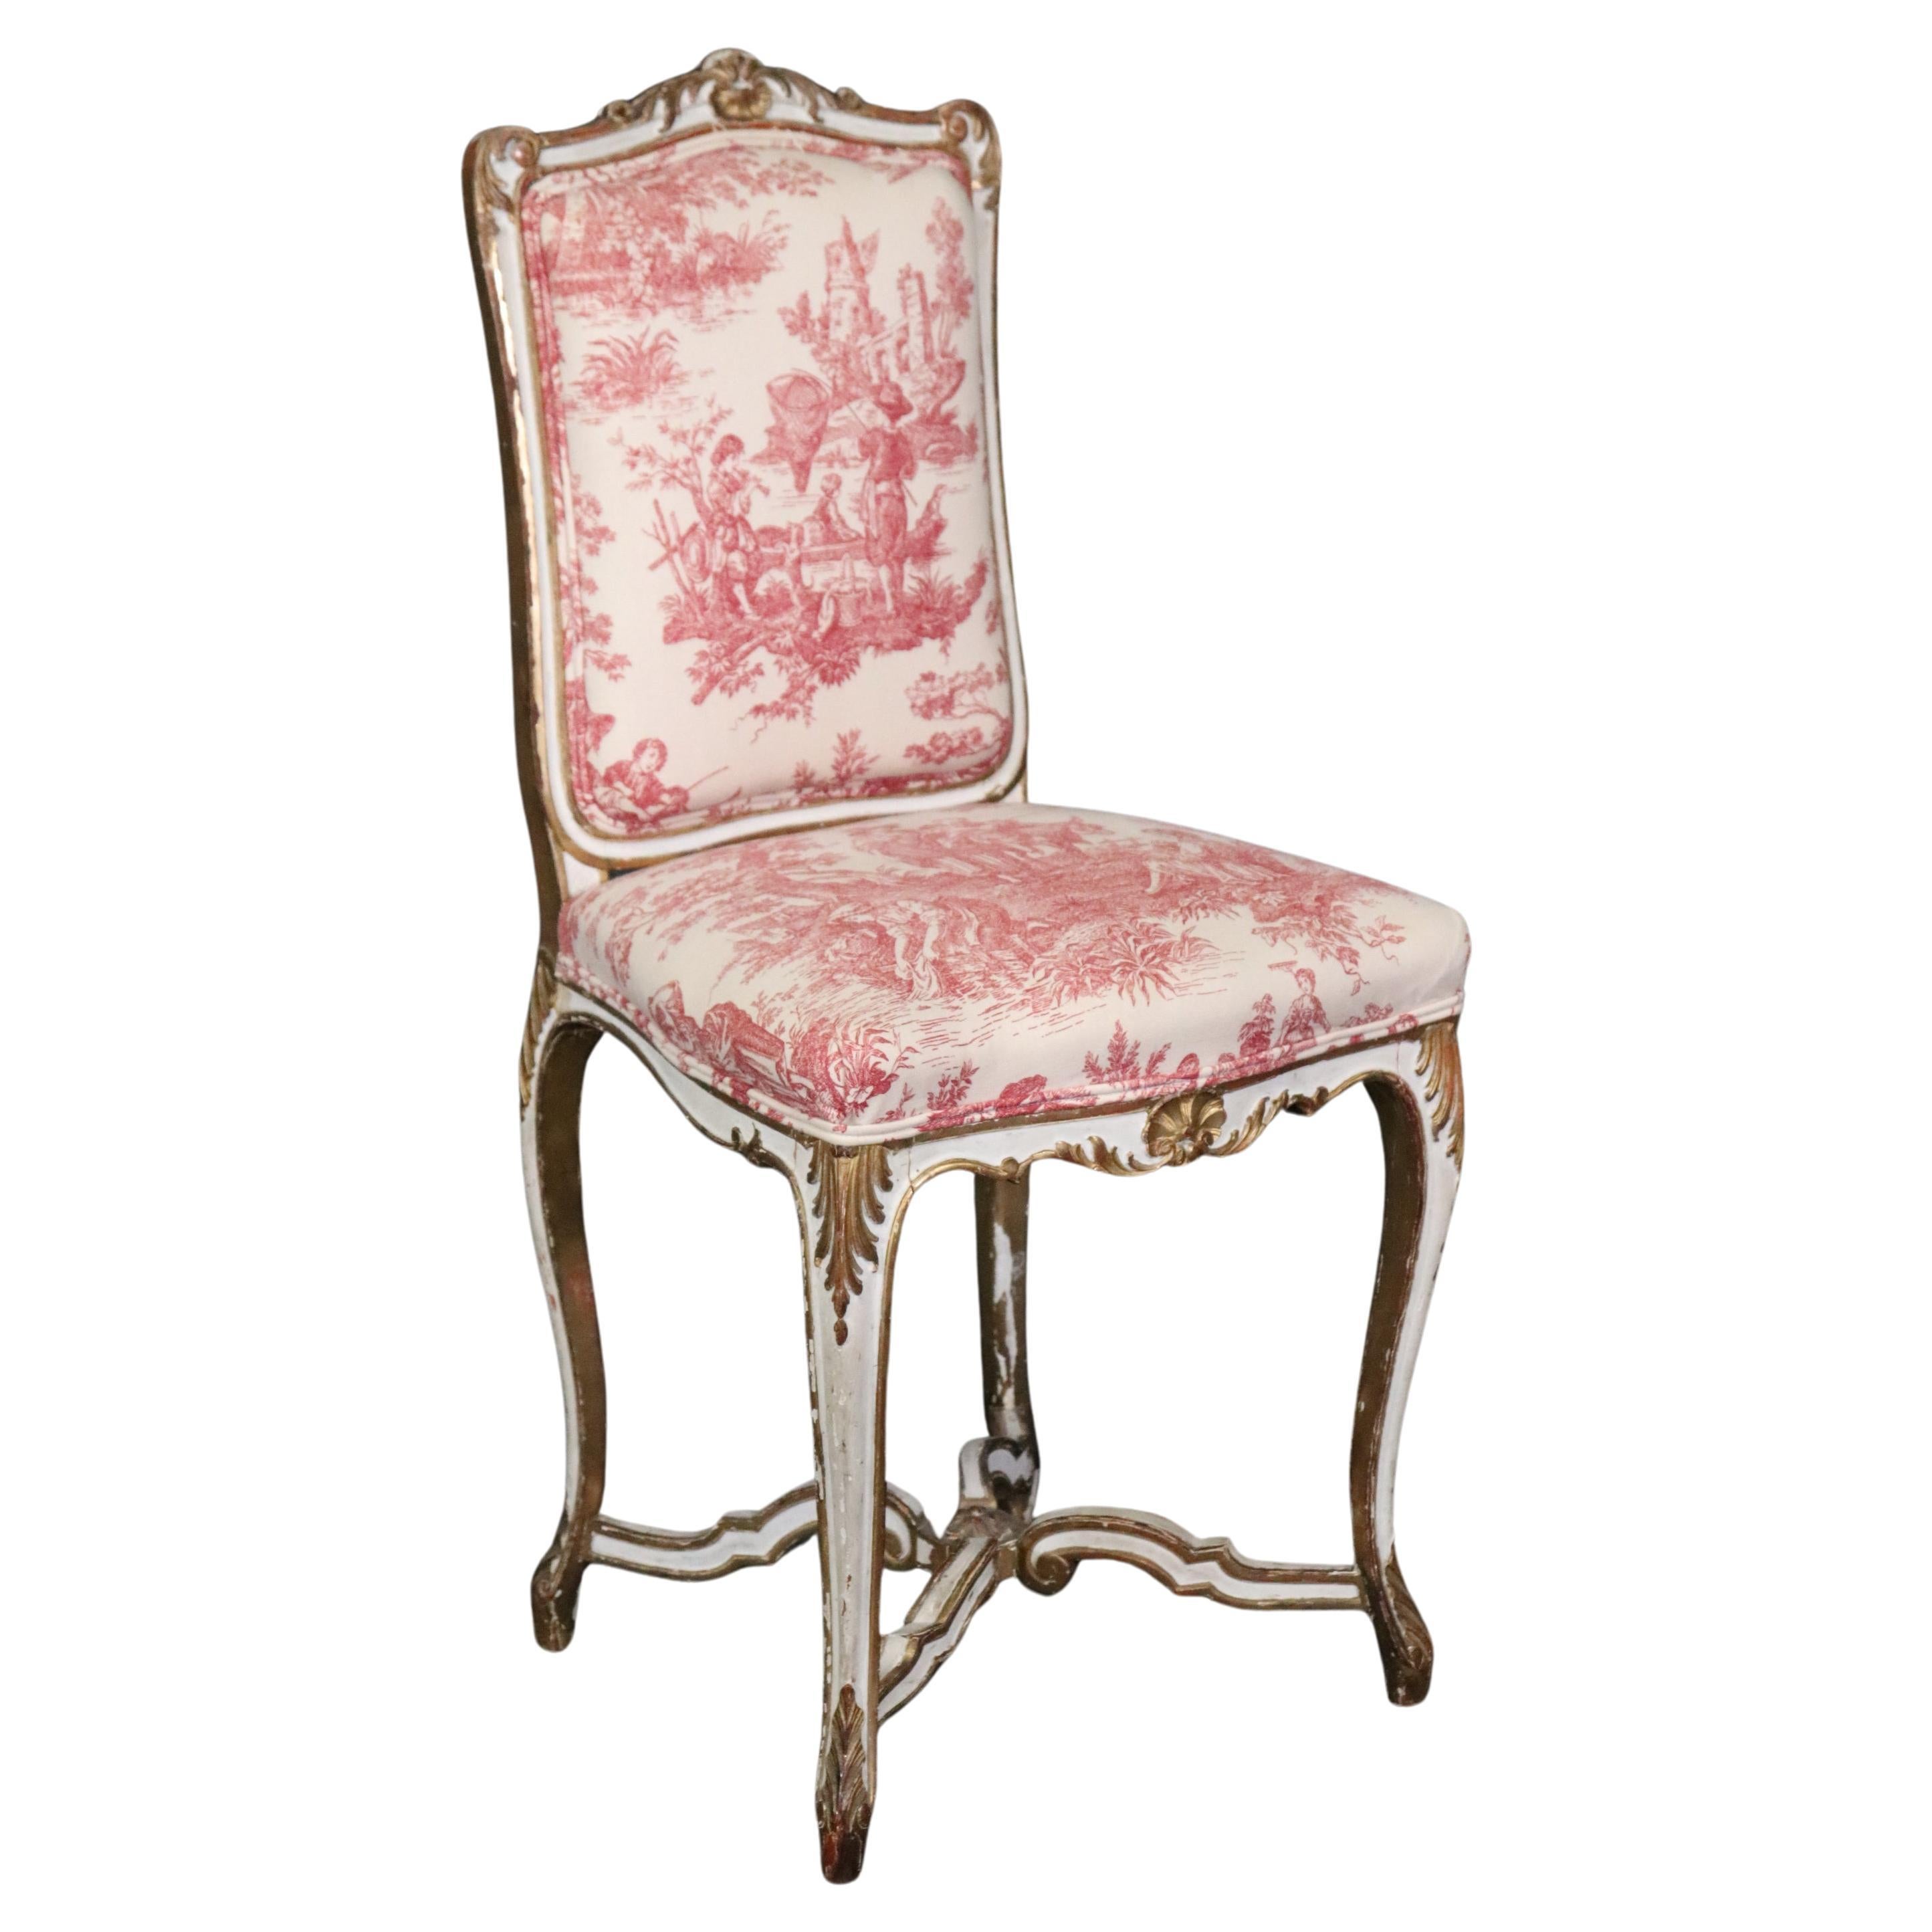 Antique Louis XV Rococo Style French Paint Decorated & Gilt Desk Chair For Sale